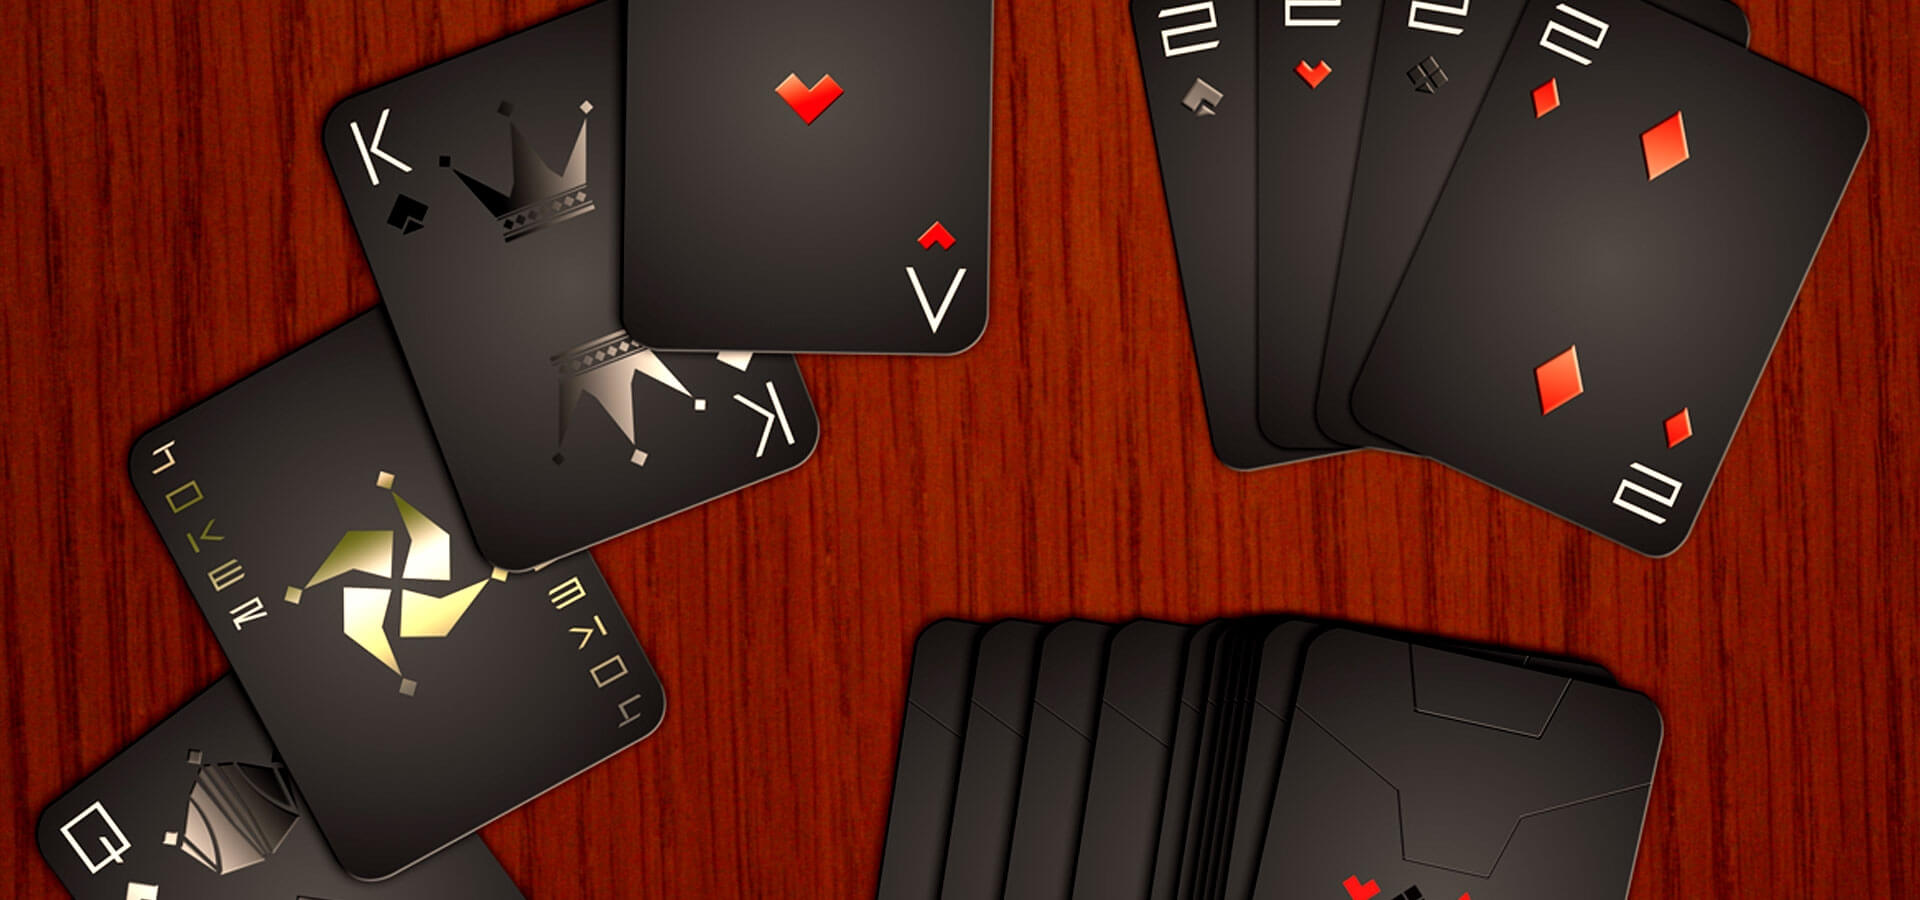 22+ Playing Card Designs | Free & Premium Templates Inside Playing Card Template Illustrator